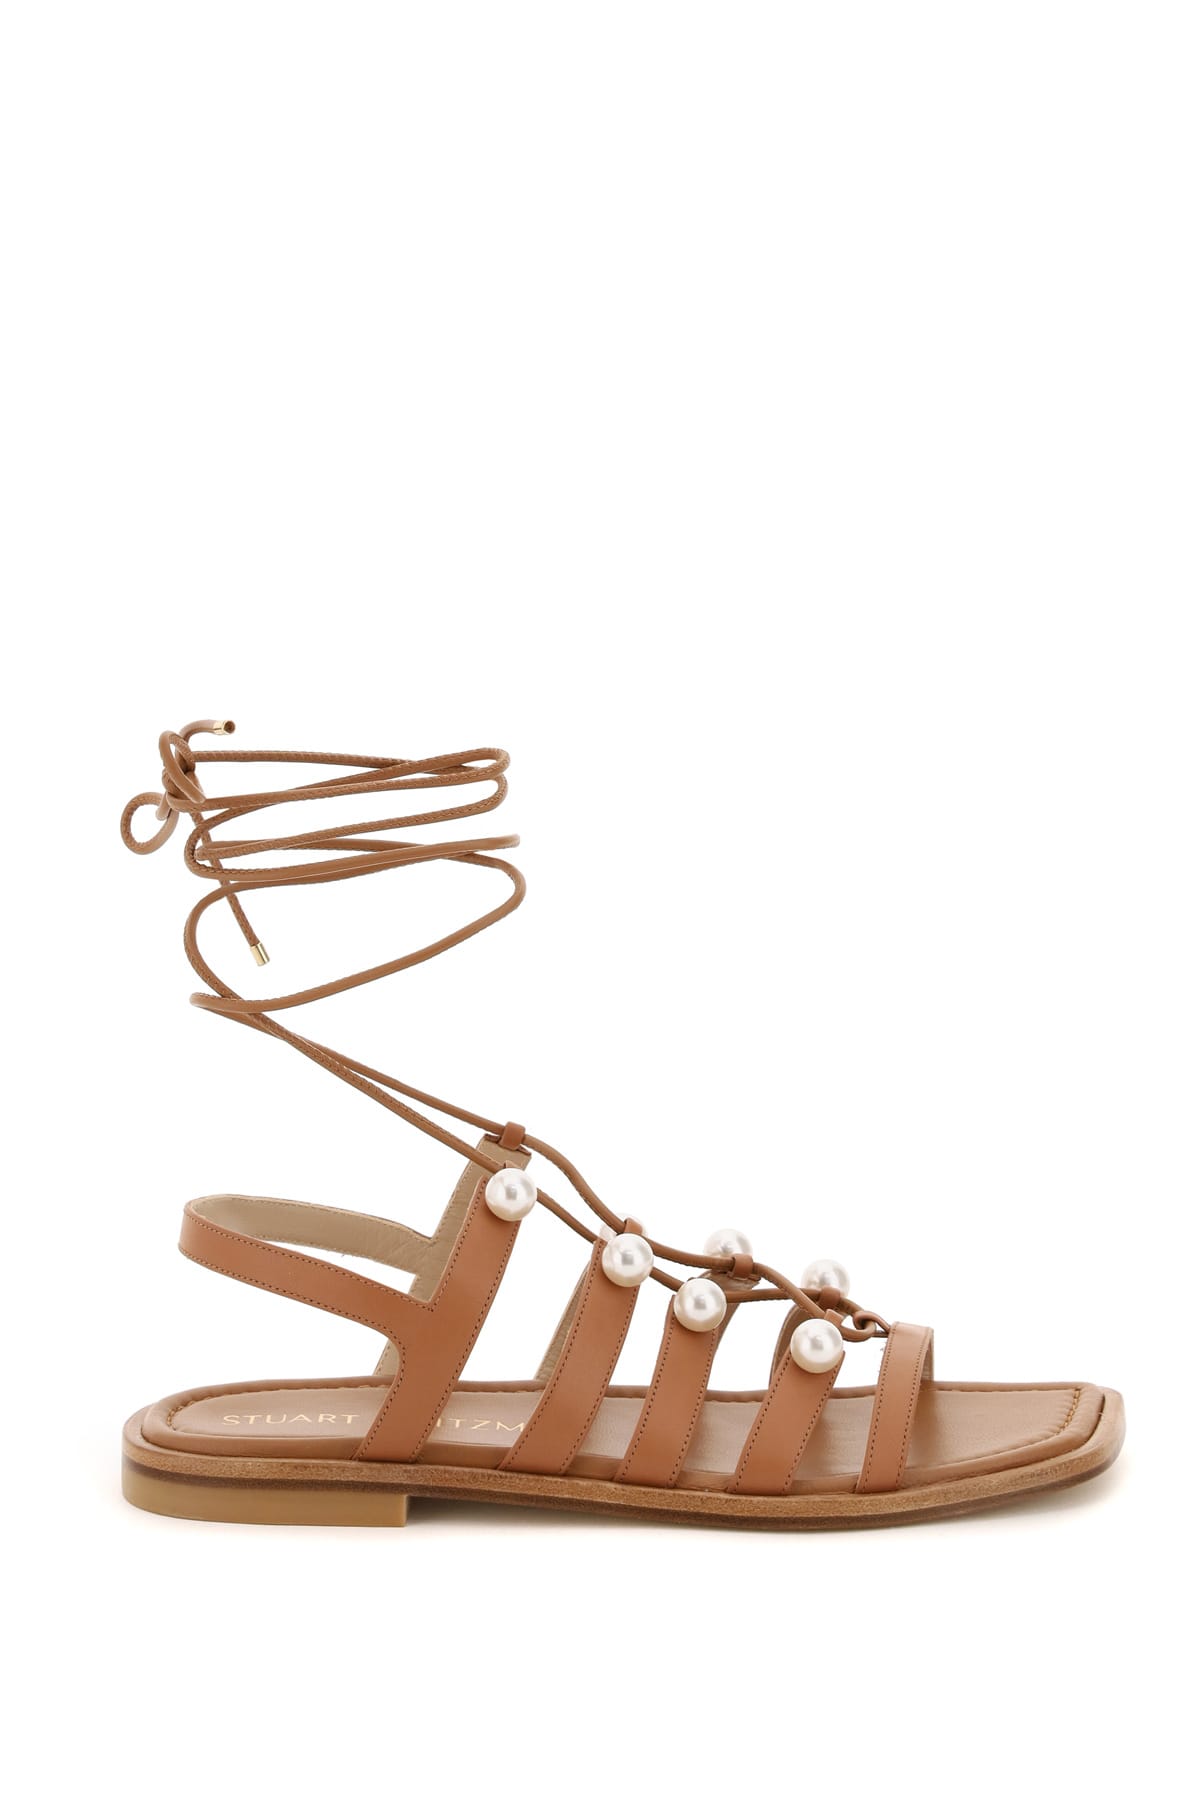 Stuart Weitzman Goldie Lace-up Sandals With Pearls